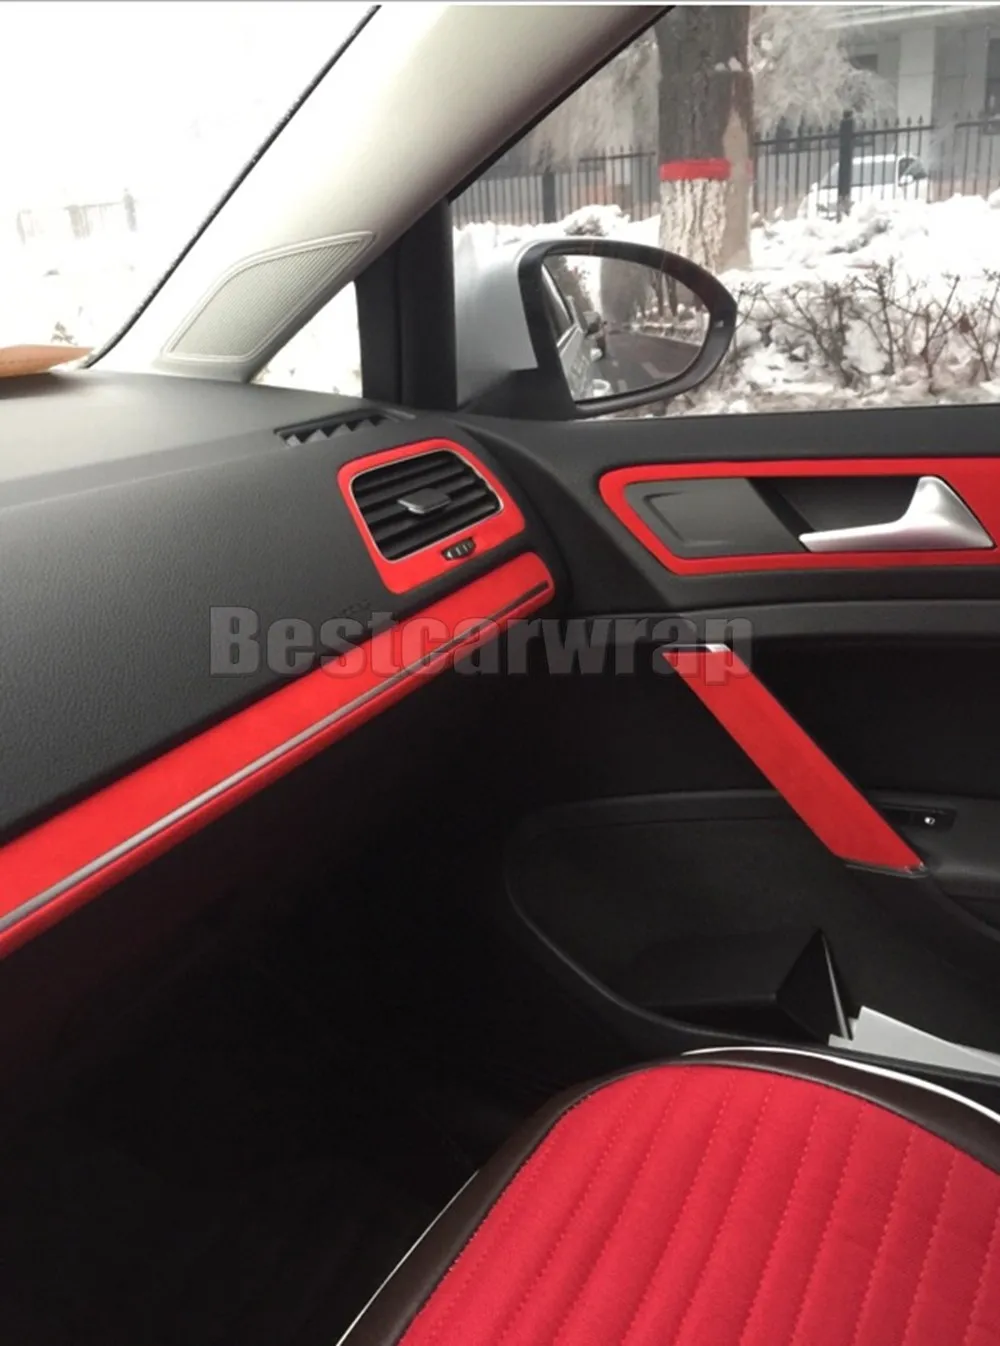 Us 135 0 Red Velvet Suede Fabric Film For Car Interior Vinyl Wrap Roof Fabric Dashboard With Air Bubble Free Size 1 35x15m On Aliexpress